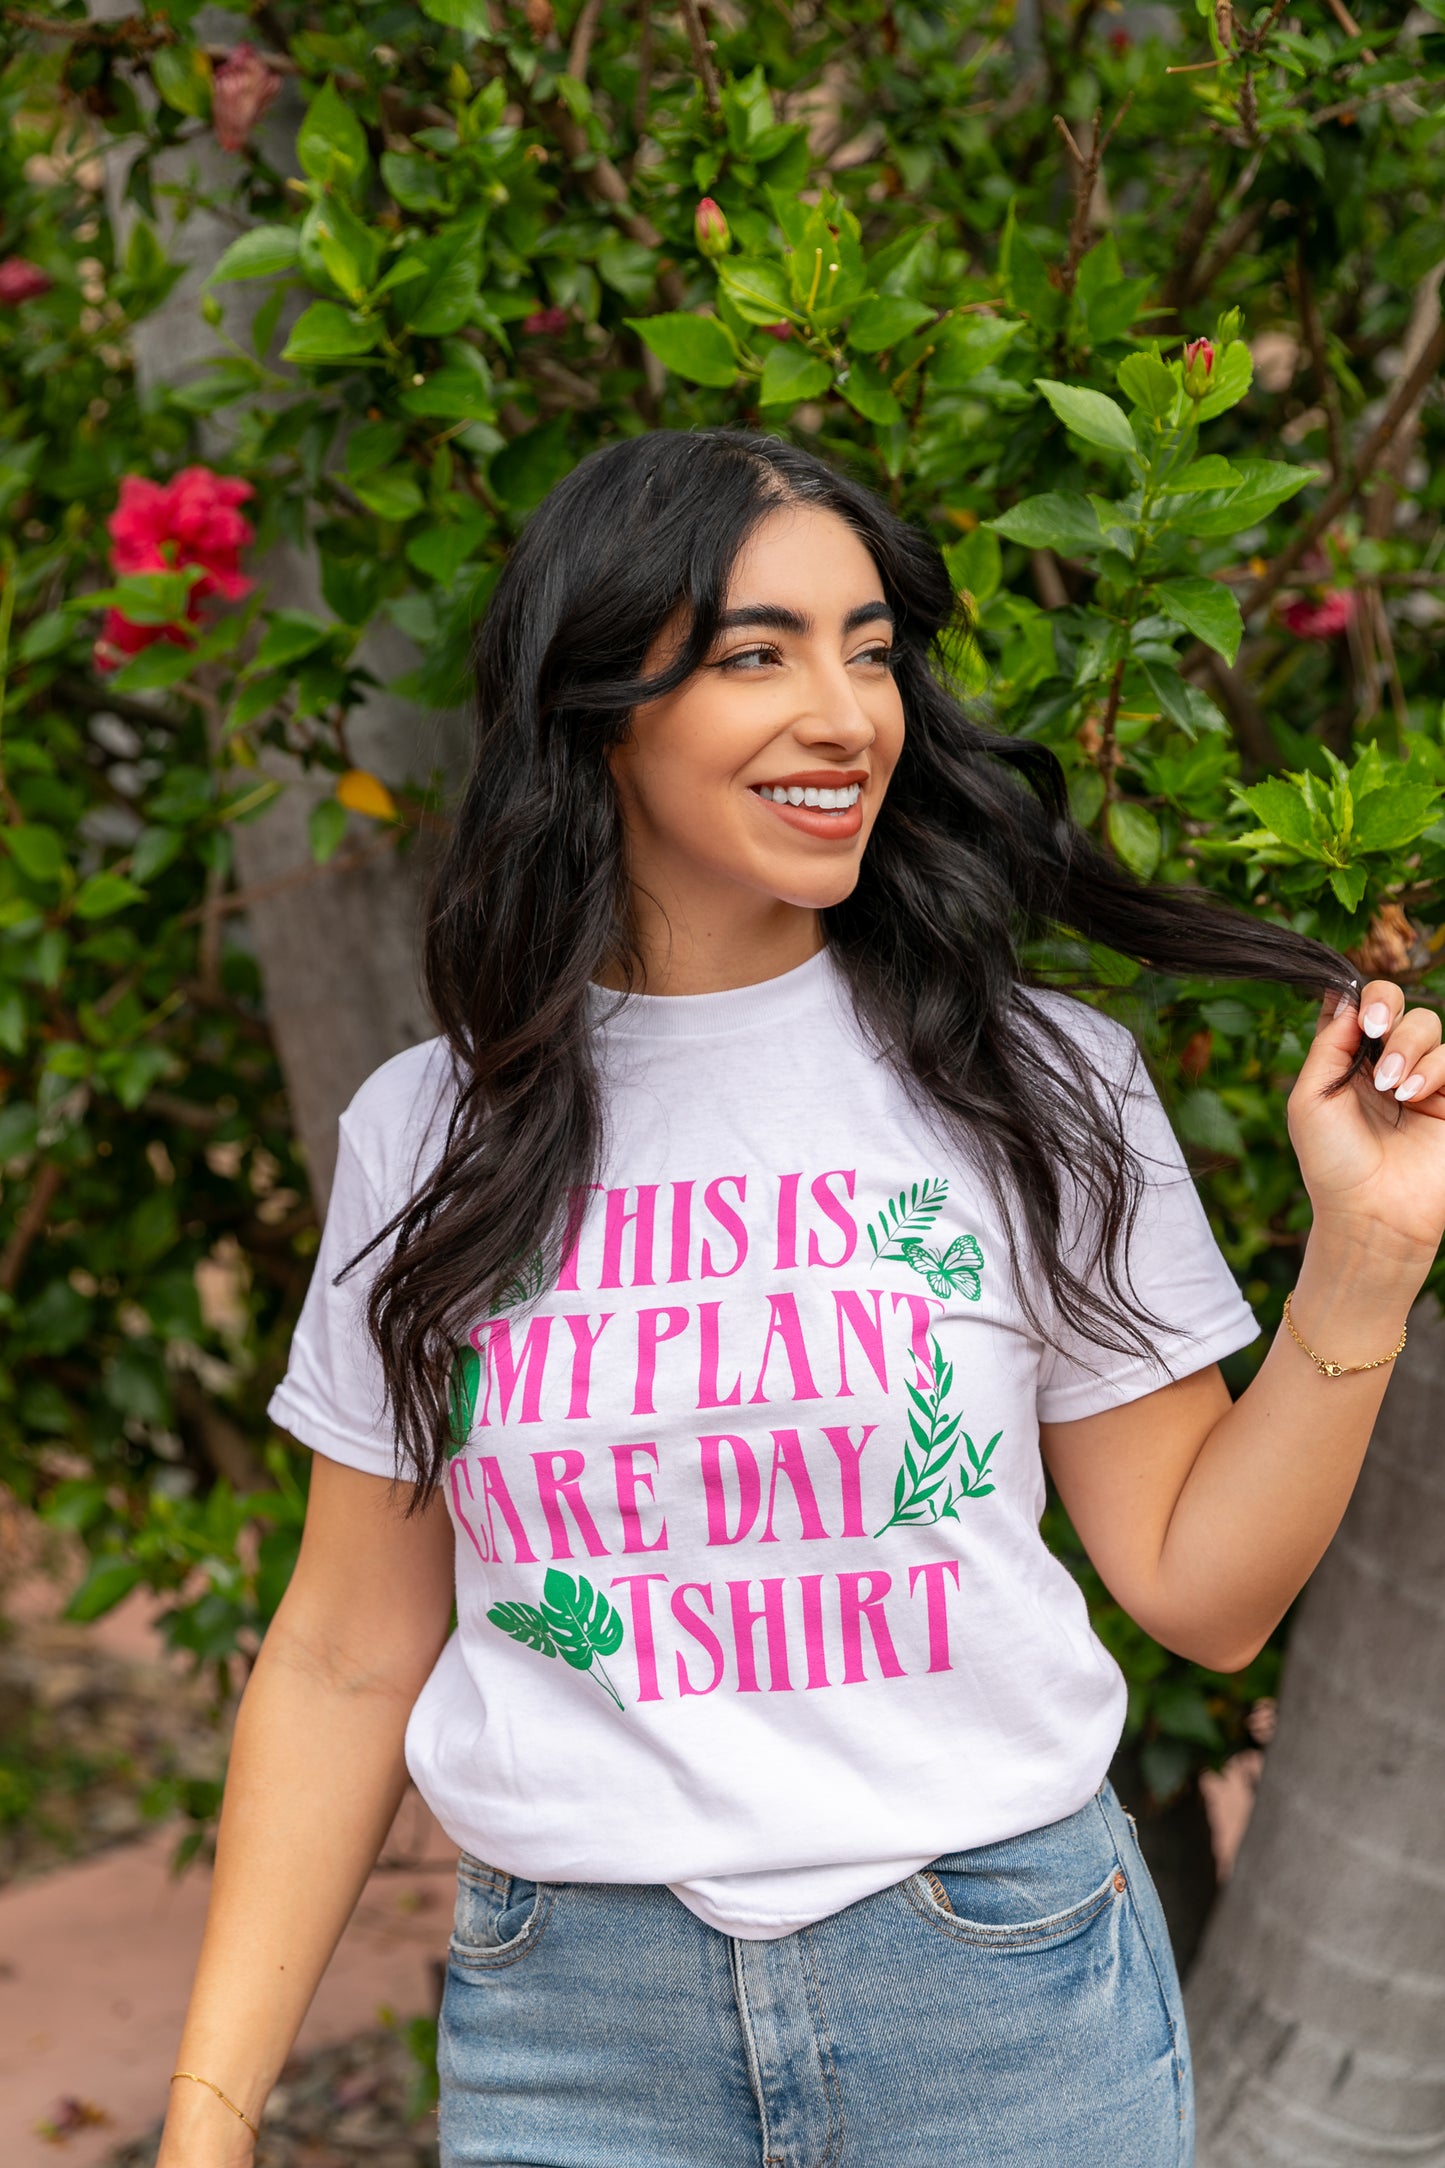 Plant Care Day T-Shirt